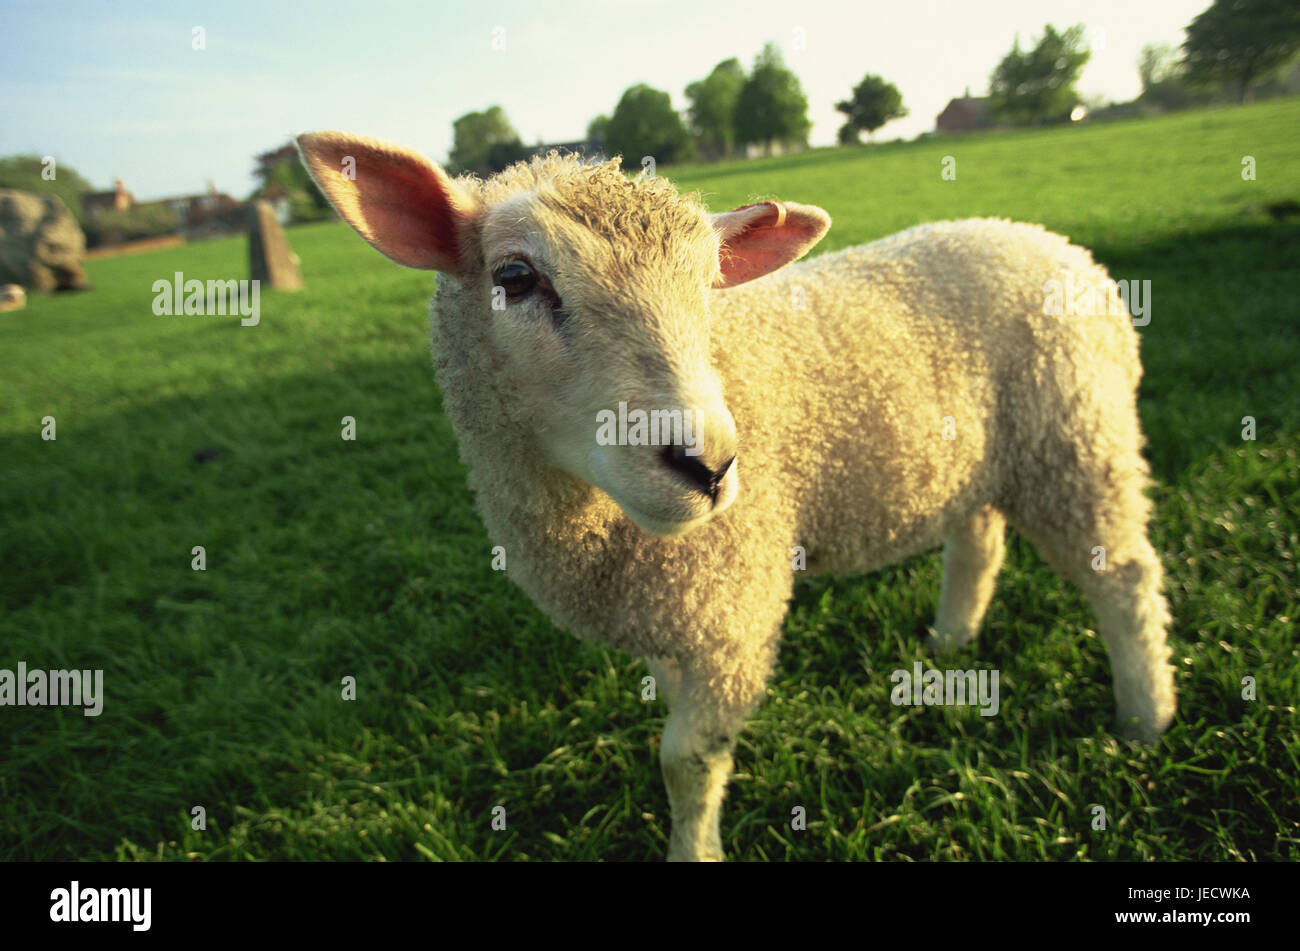 Meadow, sheep, lamb, Cotswolds, agriculture, cattle economy, animal, mammal, benefit animal, cattle breeding, stockbreeding, open land position, Schafrasse, Ovis, young animal, animal child, curiously, Stock Photo